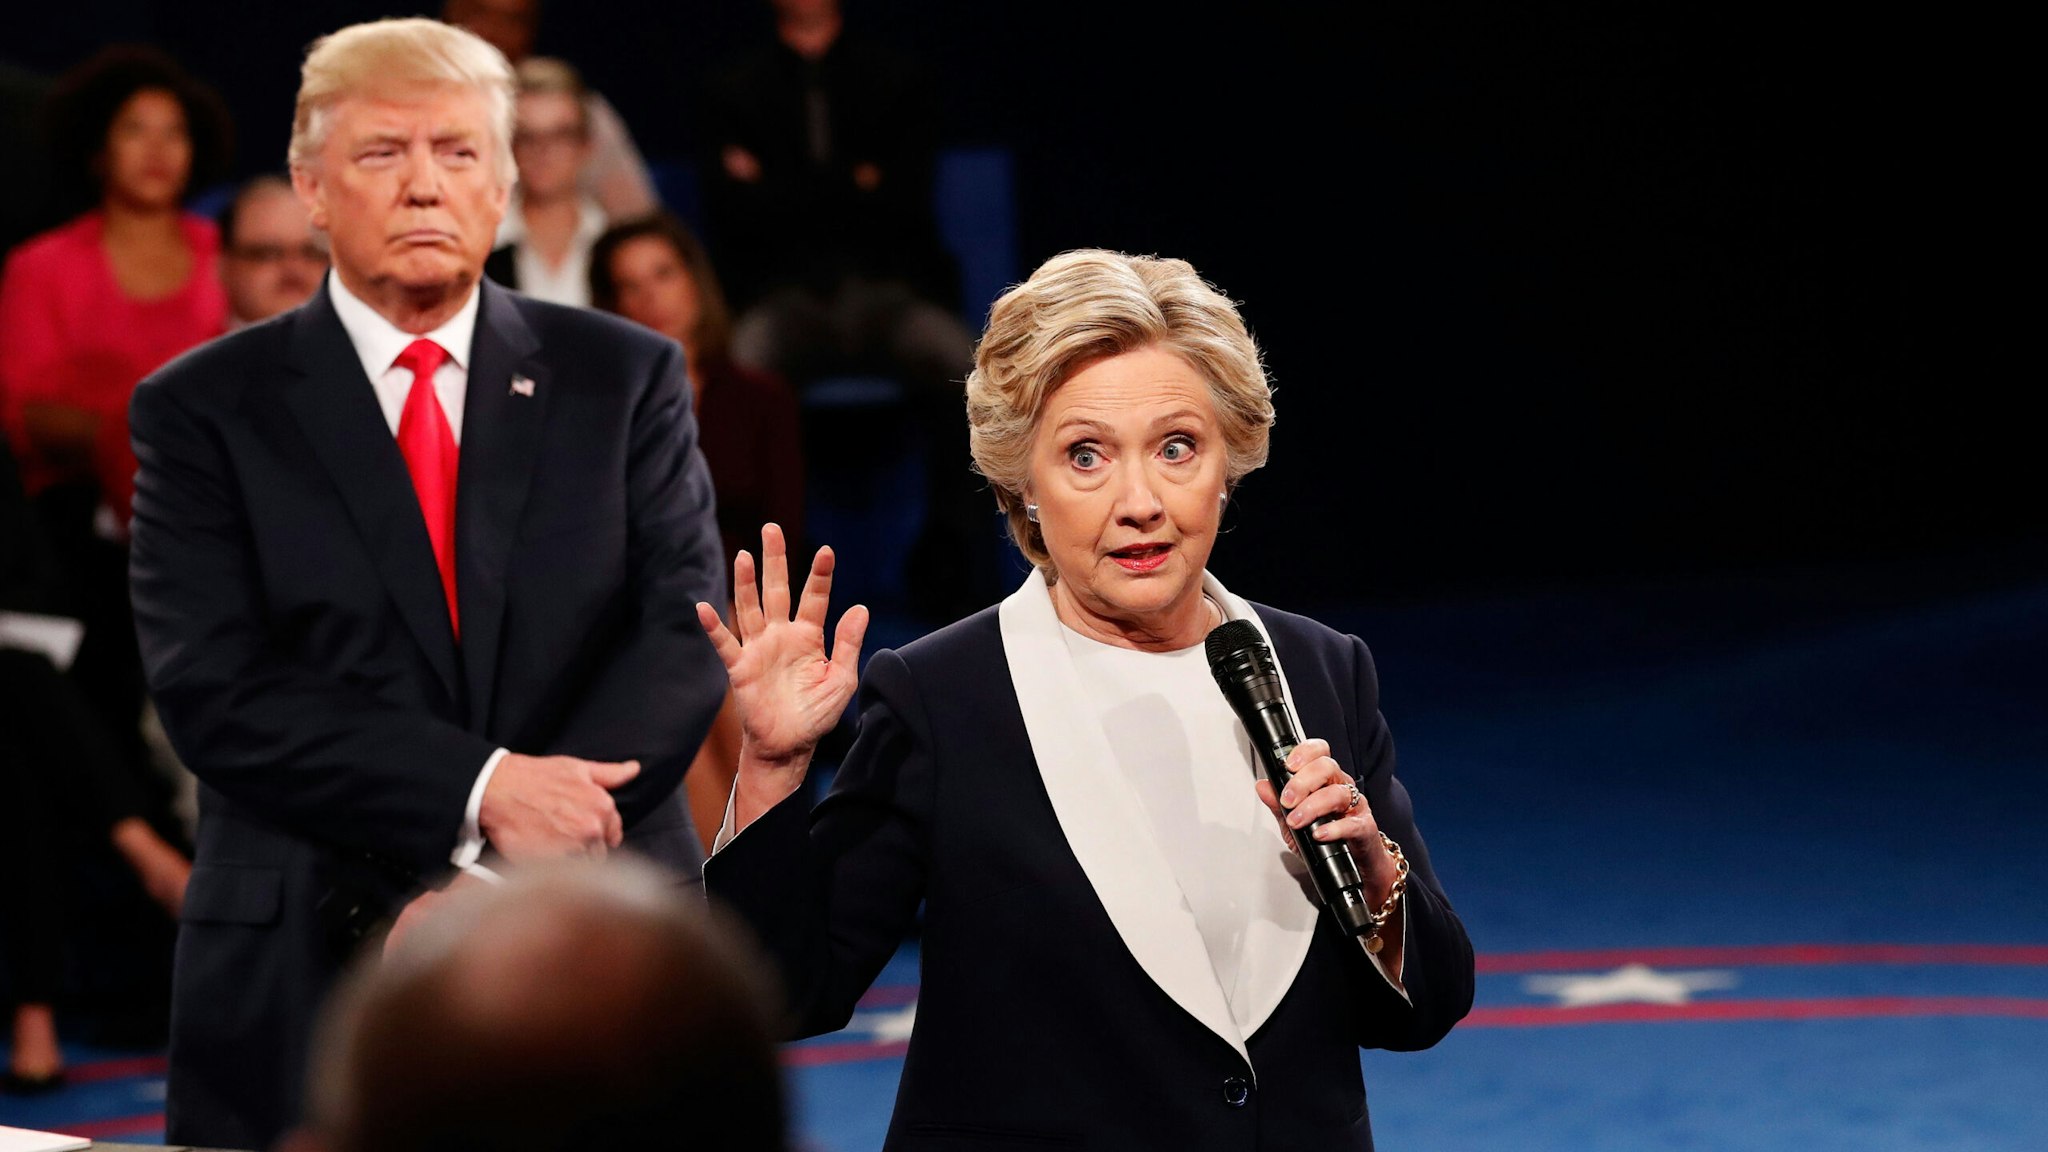 ST LOUIS, MO - OCTOBER 09: Democratic presidential nominee former Secretary of State Hillary Clinton (R) speaks as Republican presidential nominee Donald Trump listens during the town hall debate at Washington University on October 9, 2016 in St Louis, Missouri. This is the second of three presidential debates scheduled prior to the November 8th election.